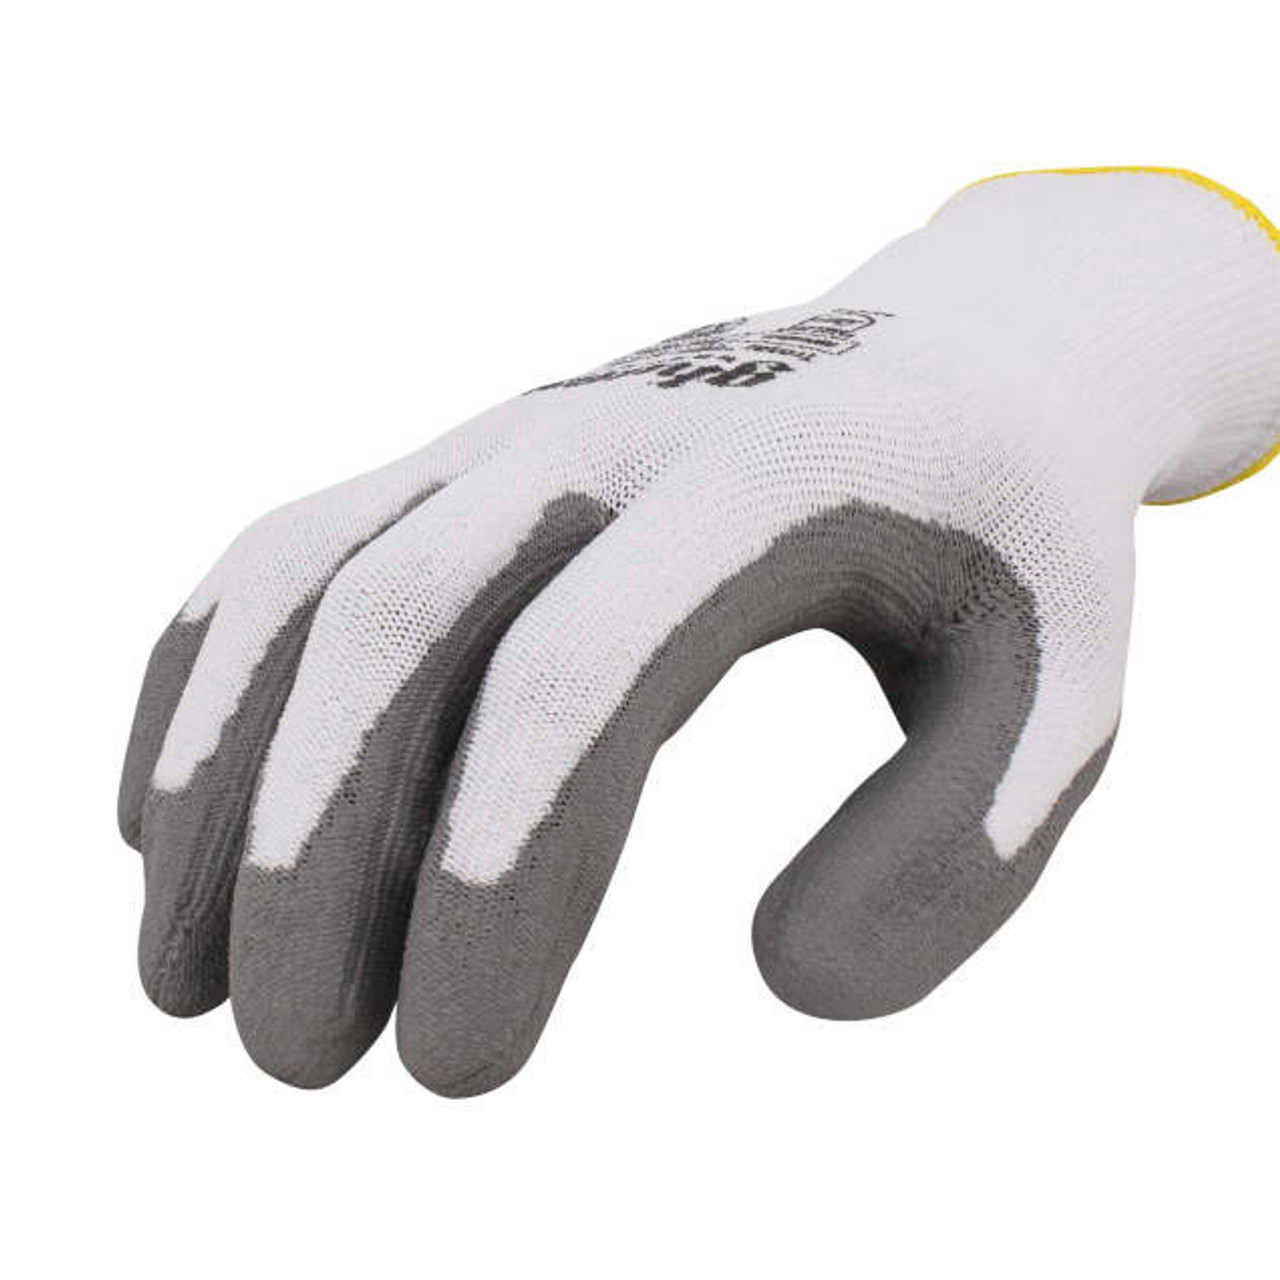 Radians RWG50 Cut Protection Level A4 Work Glove S